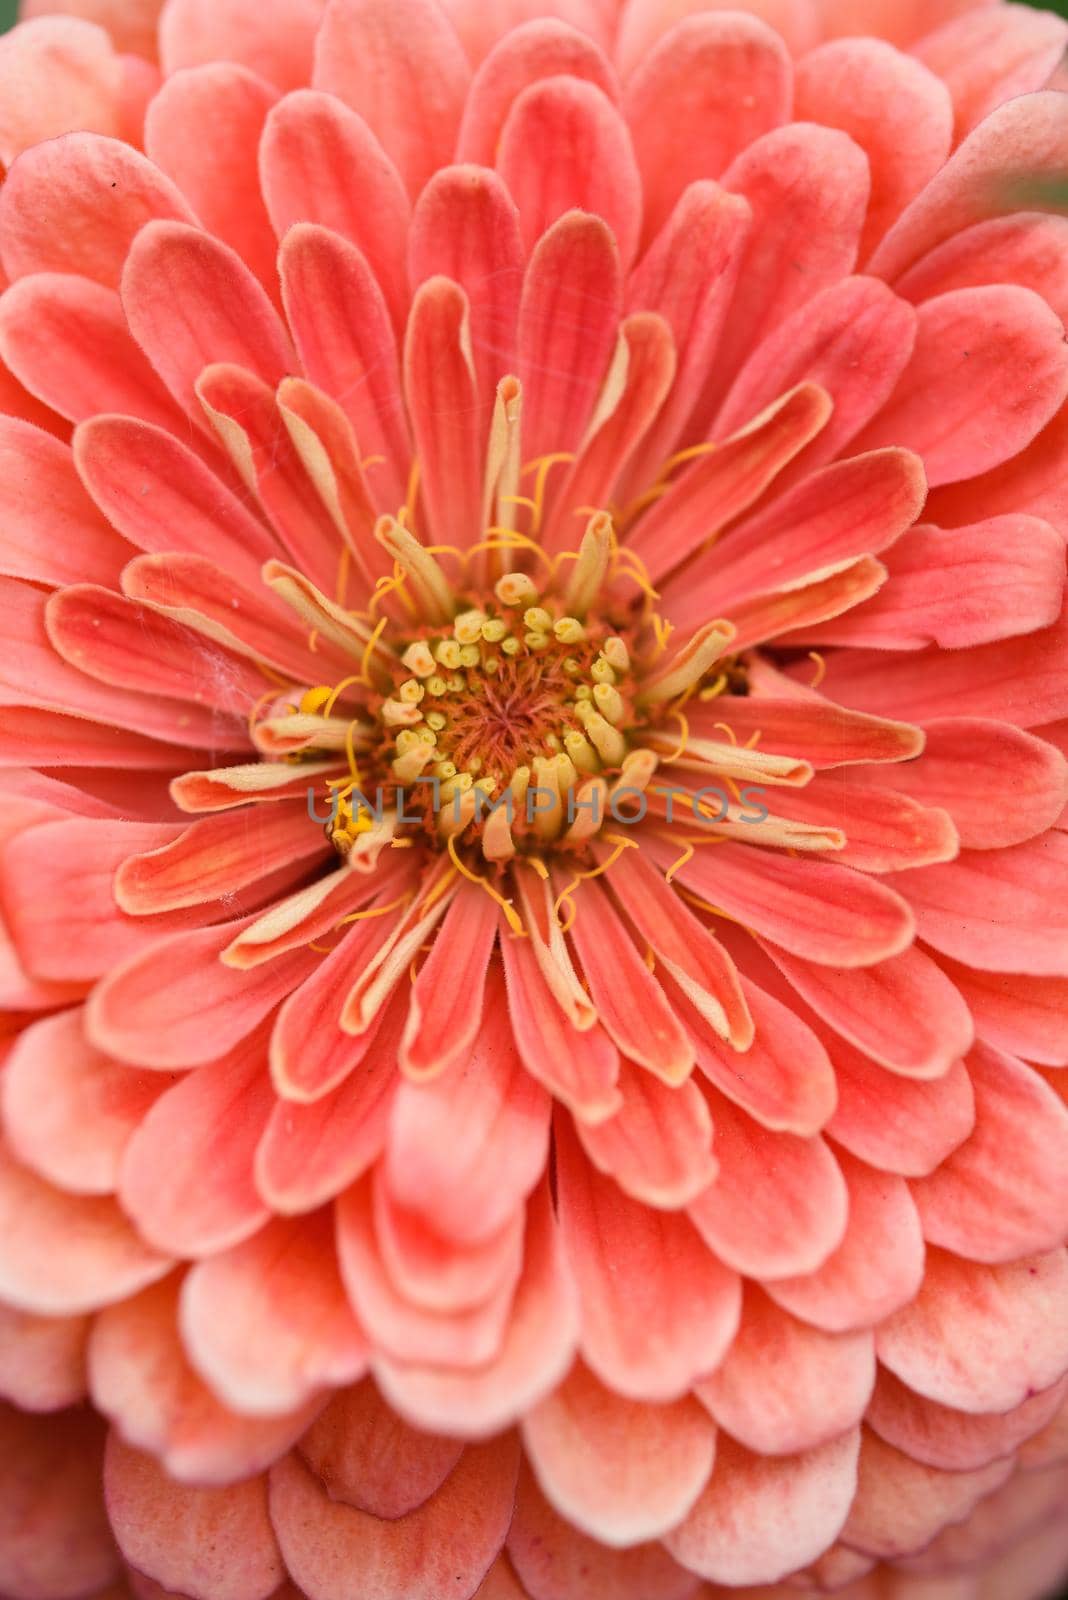 A flower bud of zinnia close-up in the garden at the end of summer.